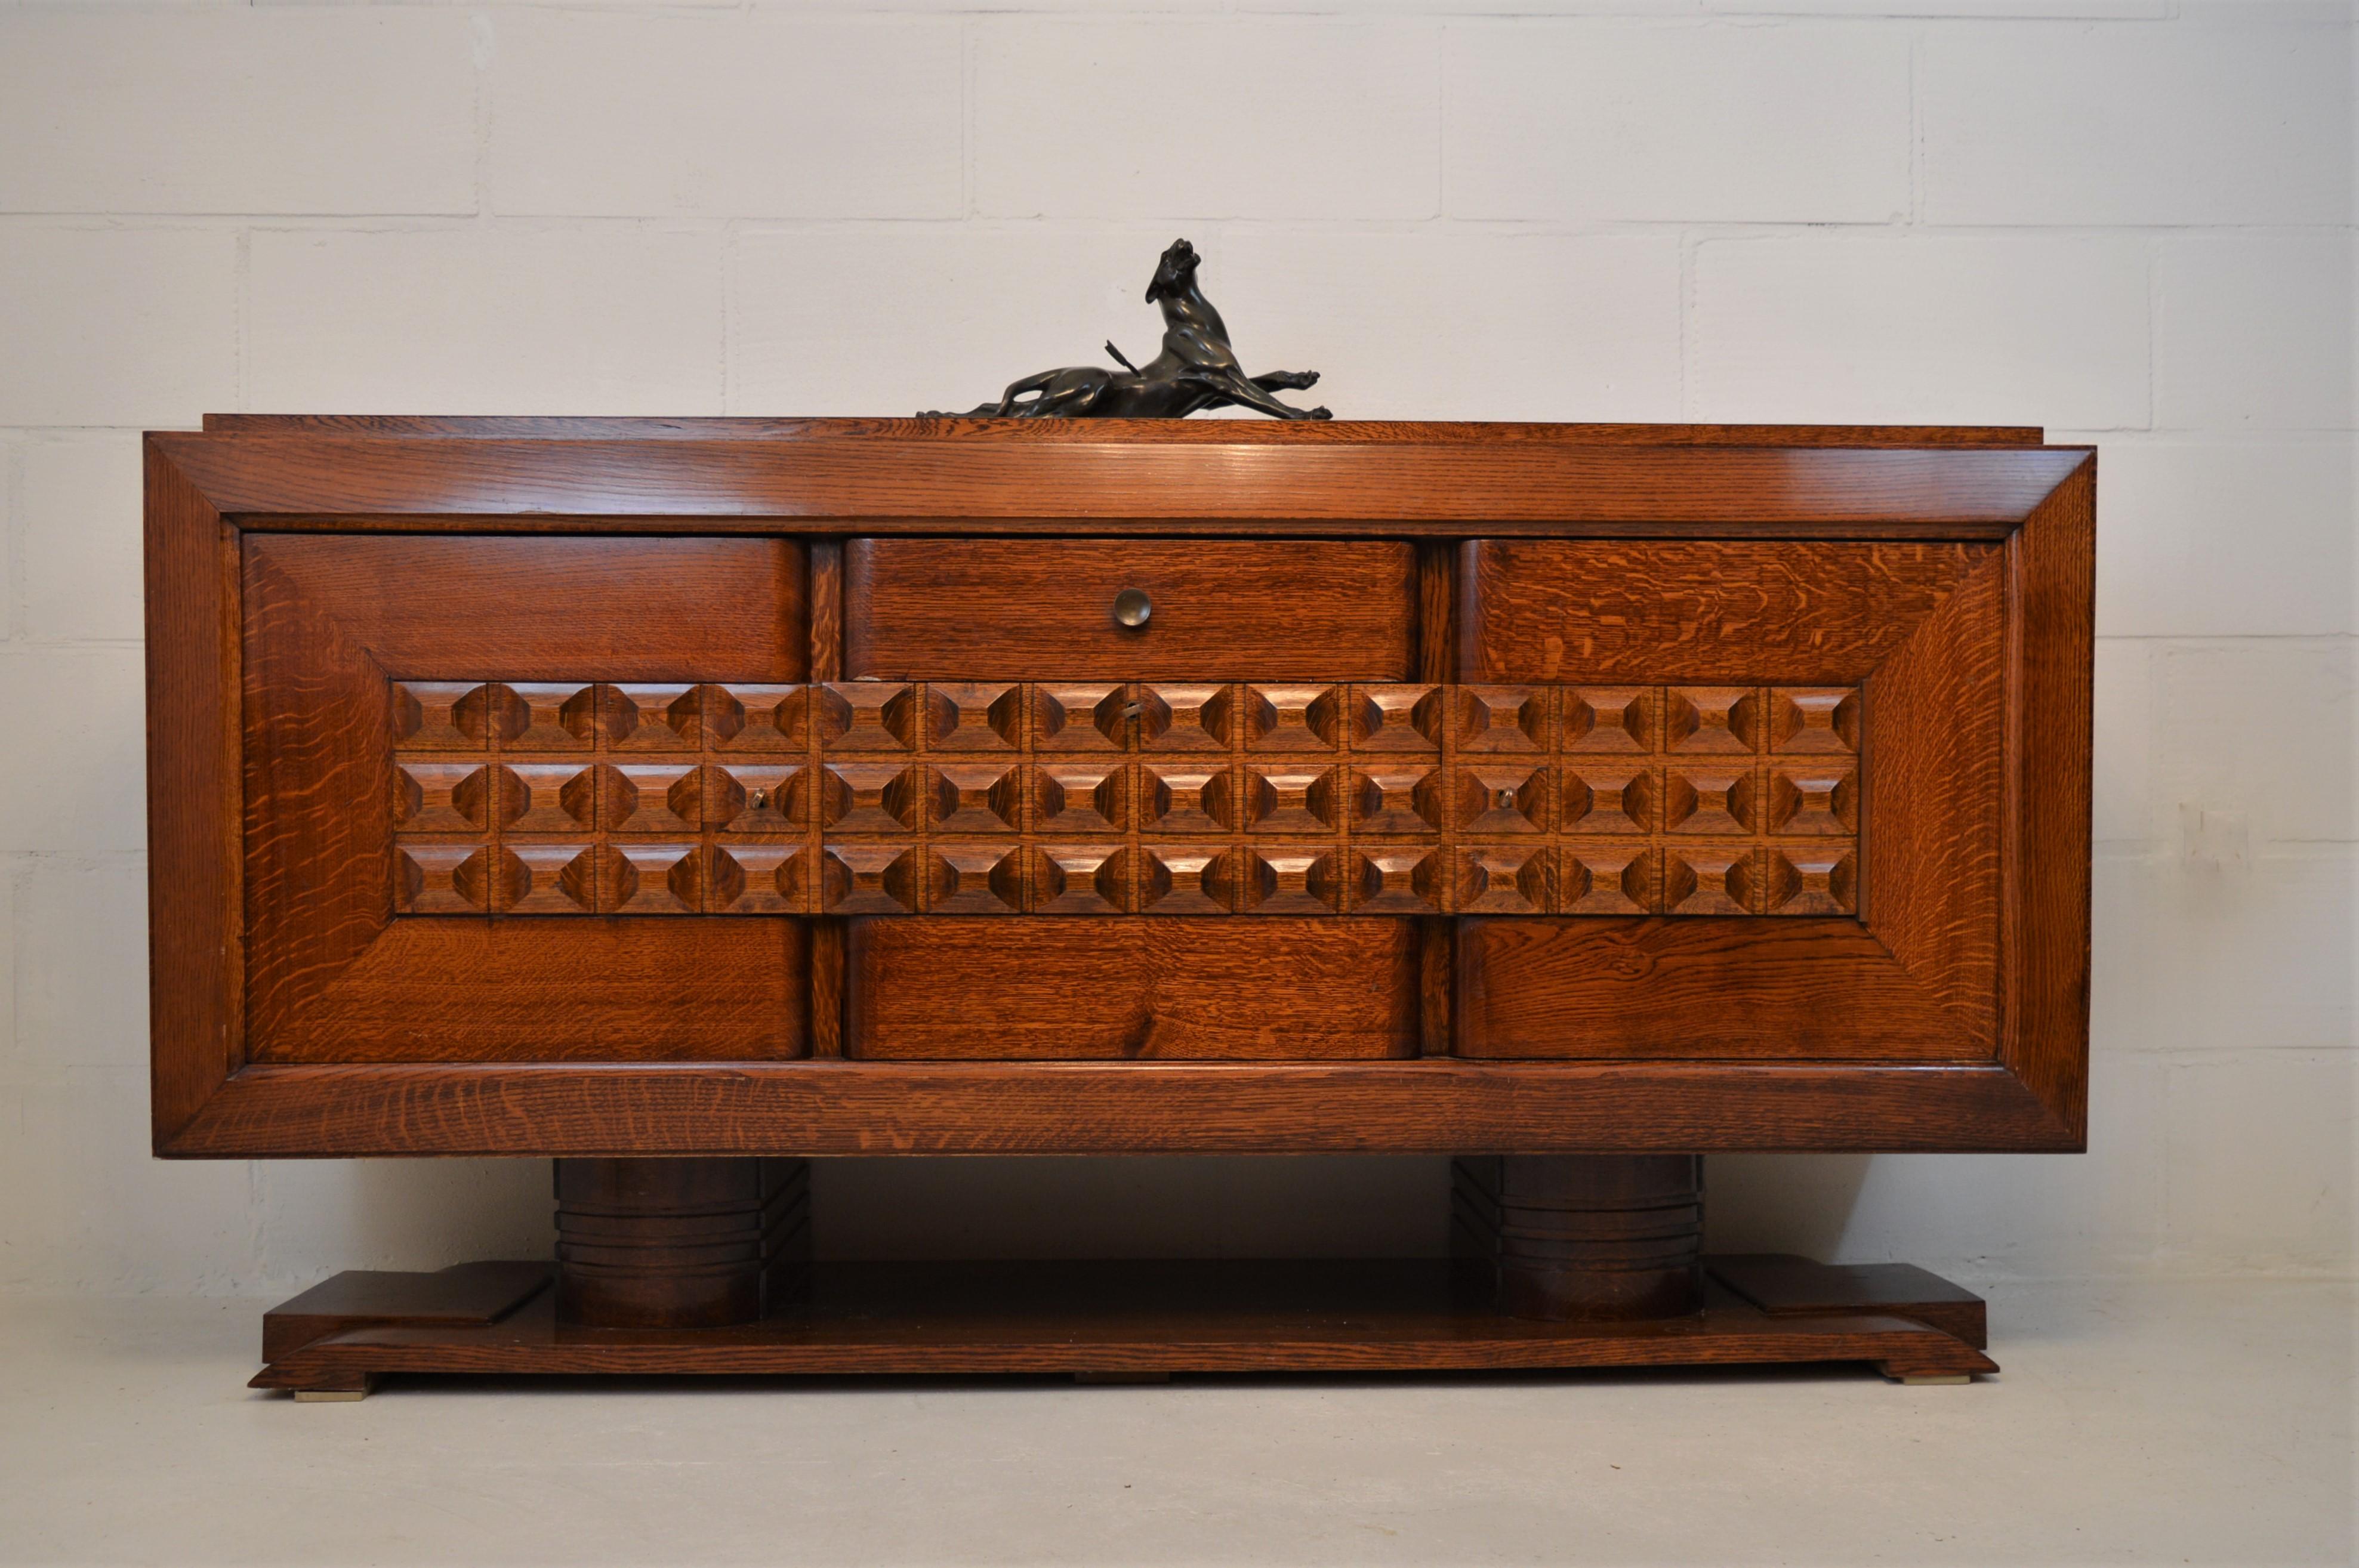 Brutalist sideboard in oak, with interesting panels, by Charles Dudouyt in the 1930s.
Beautiful design, original unrestored condition.